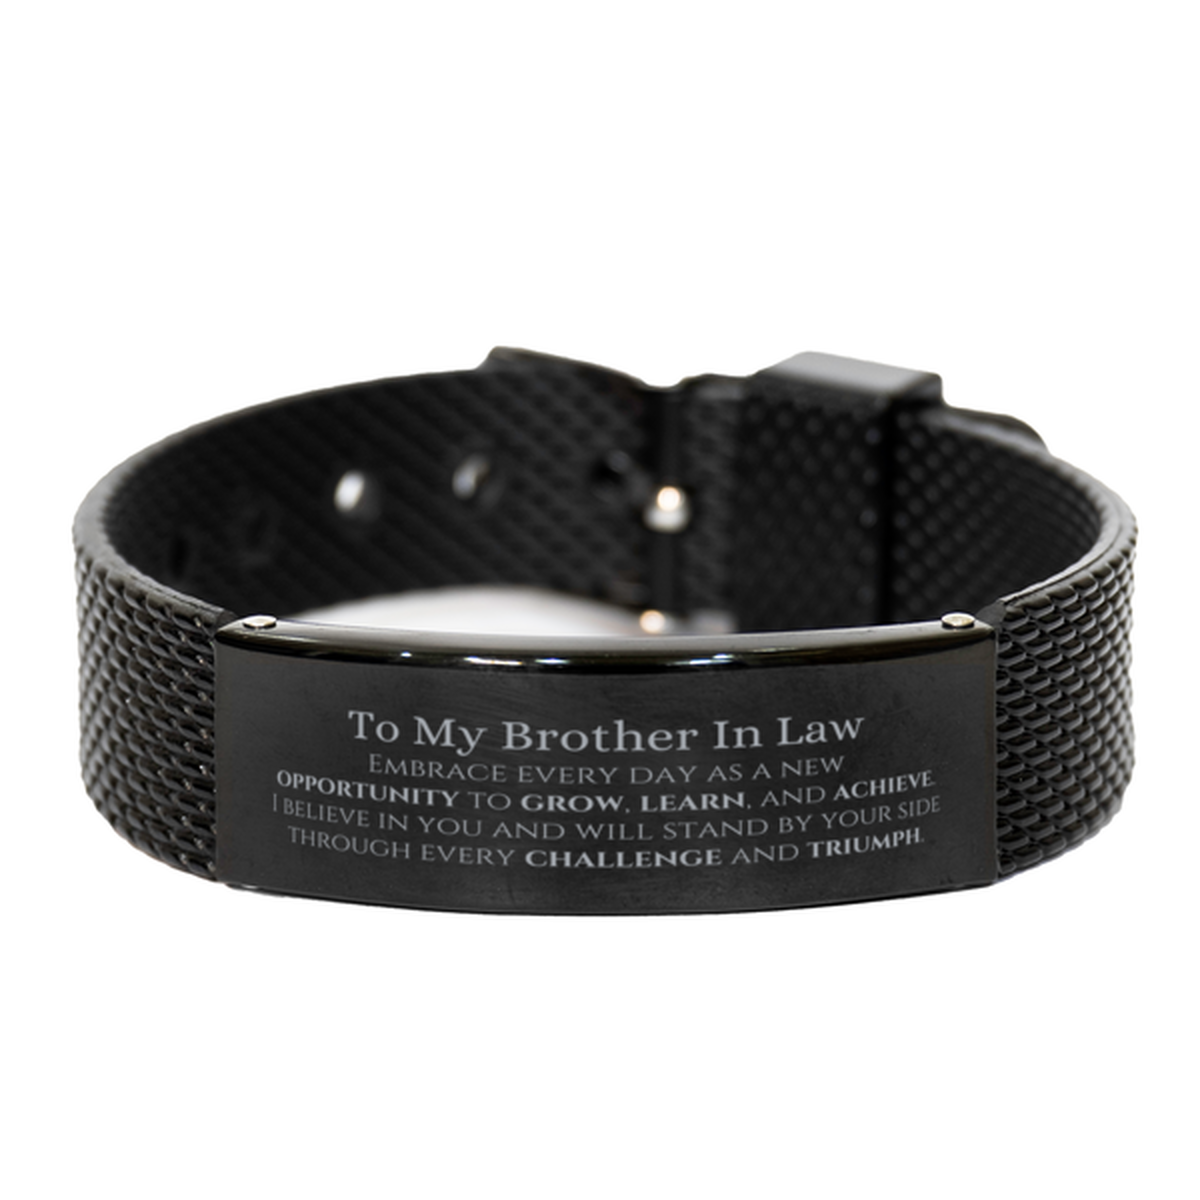 To My Brother In Law Gifts, I believe in you and will stand by your side, Inspirational Black Shark Mesh Bracelet For Brother In Law, Birthday Christmas Motivational Brother In Law Gifts